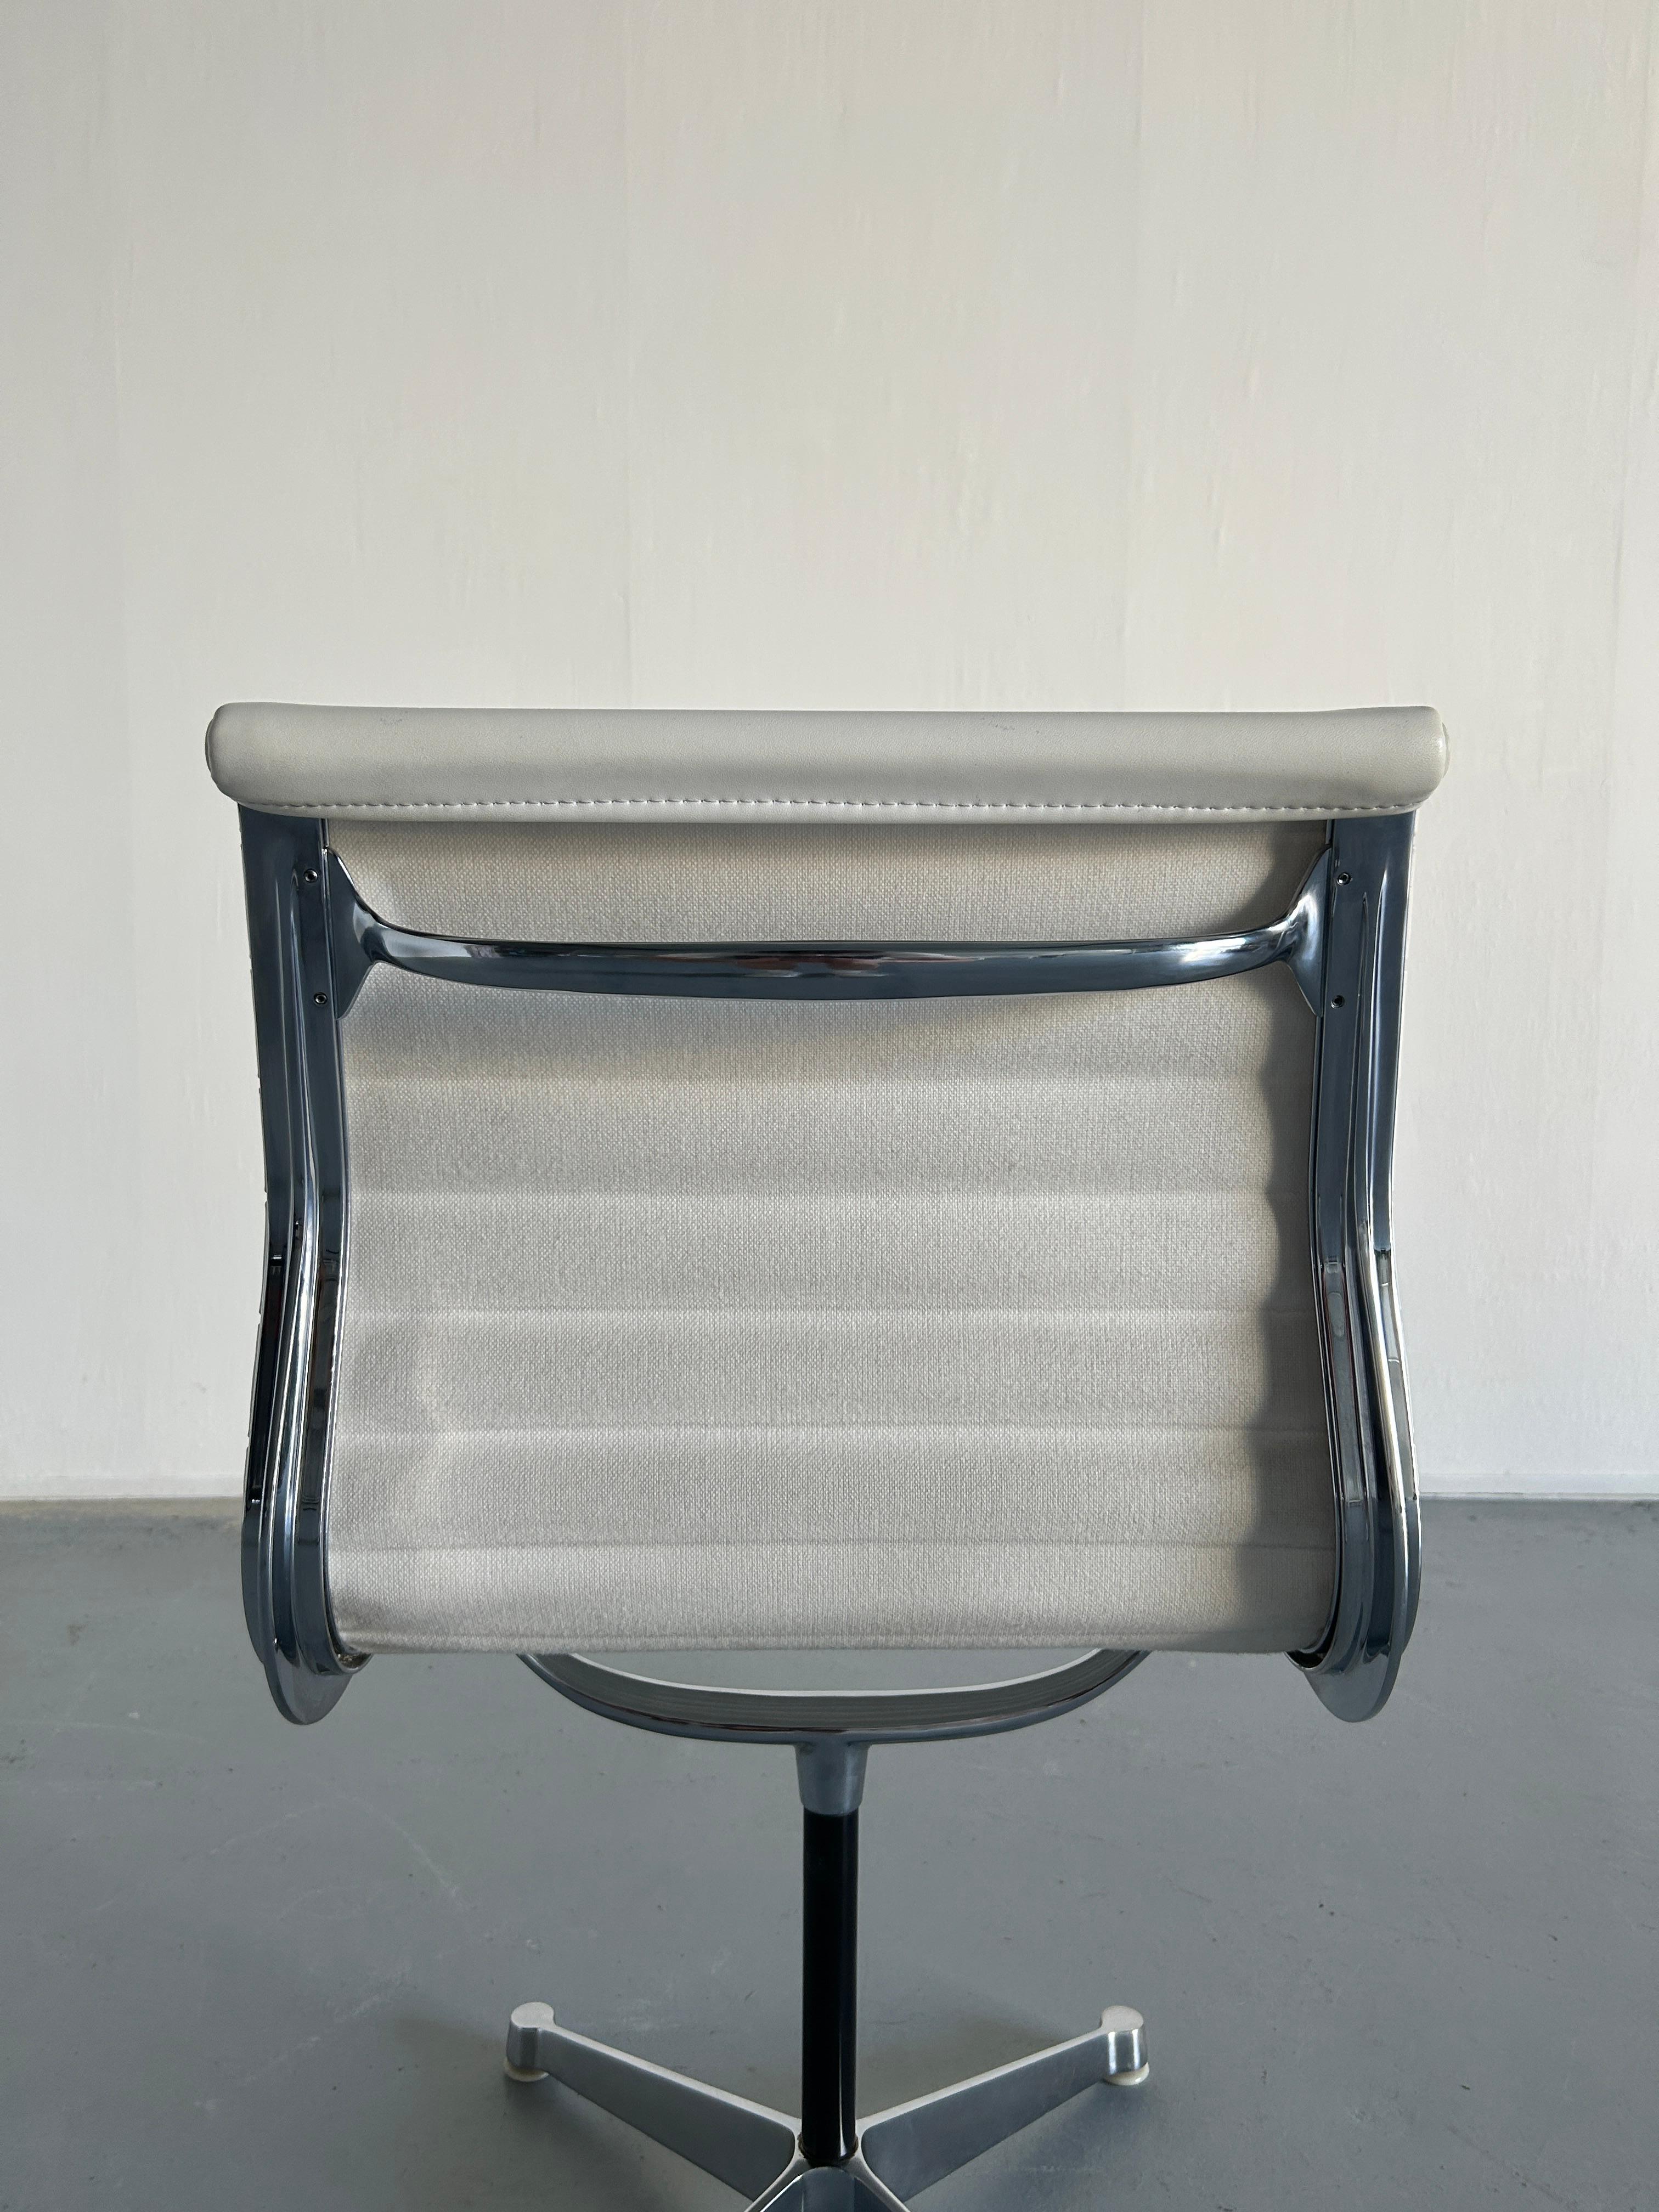 1 of 5 Original Vintage 'EA 107' Aluminium Desk Chairs by Charles & Ray Eames For Sale 4